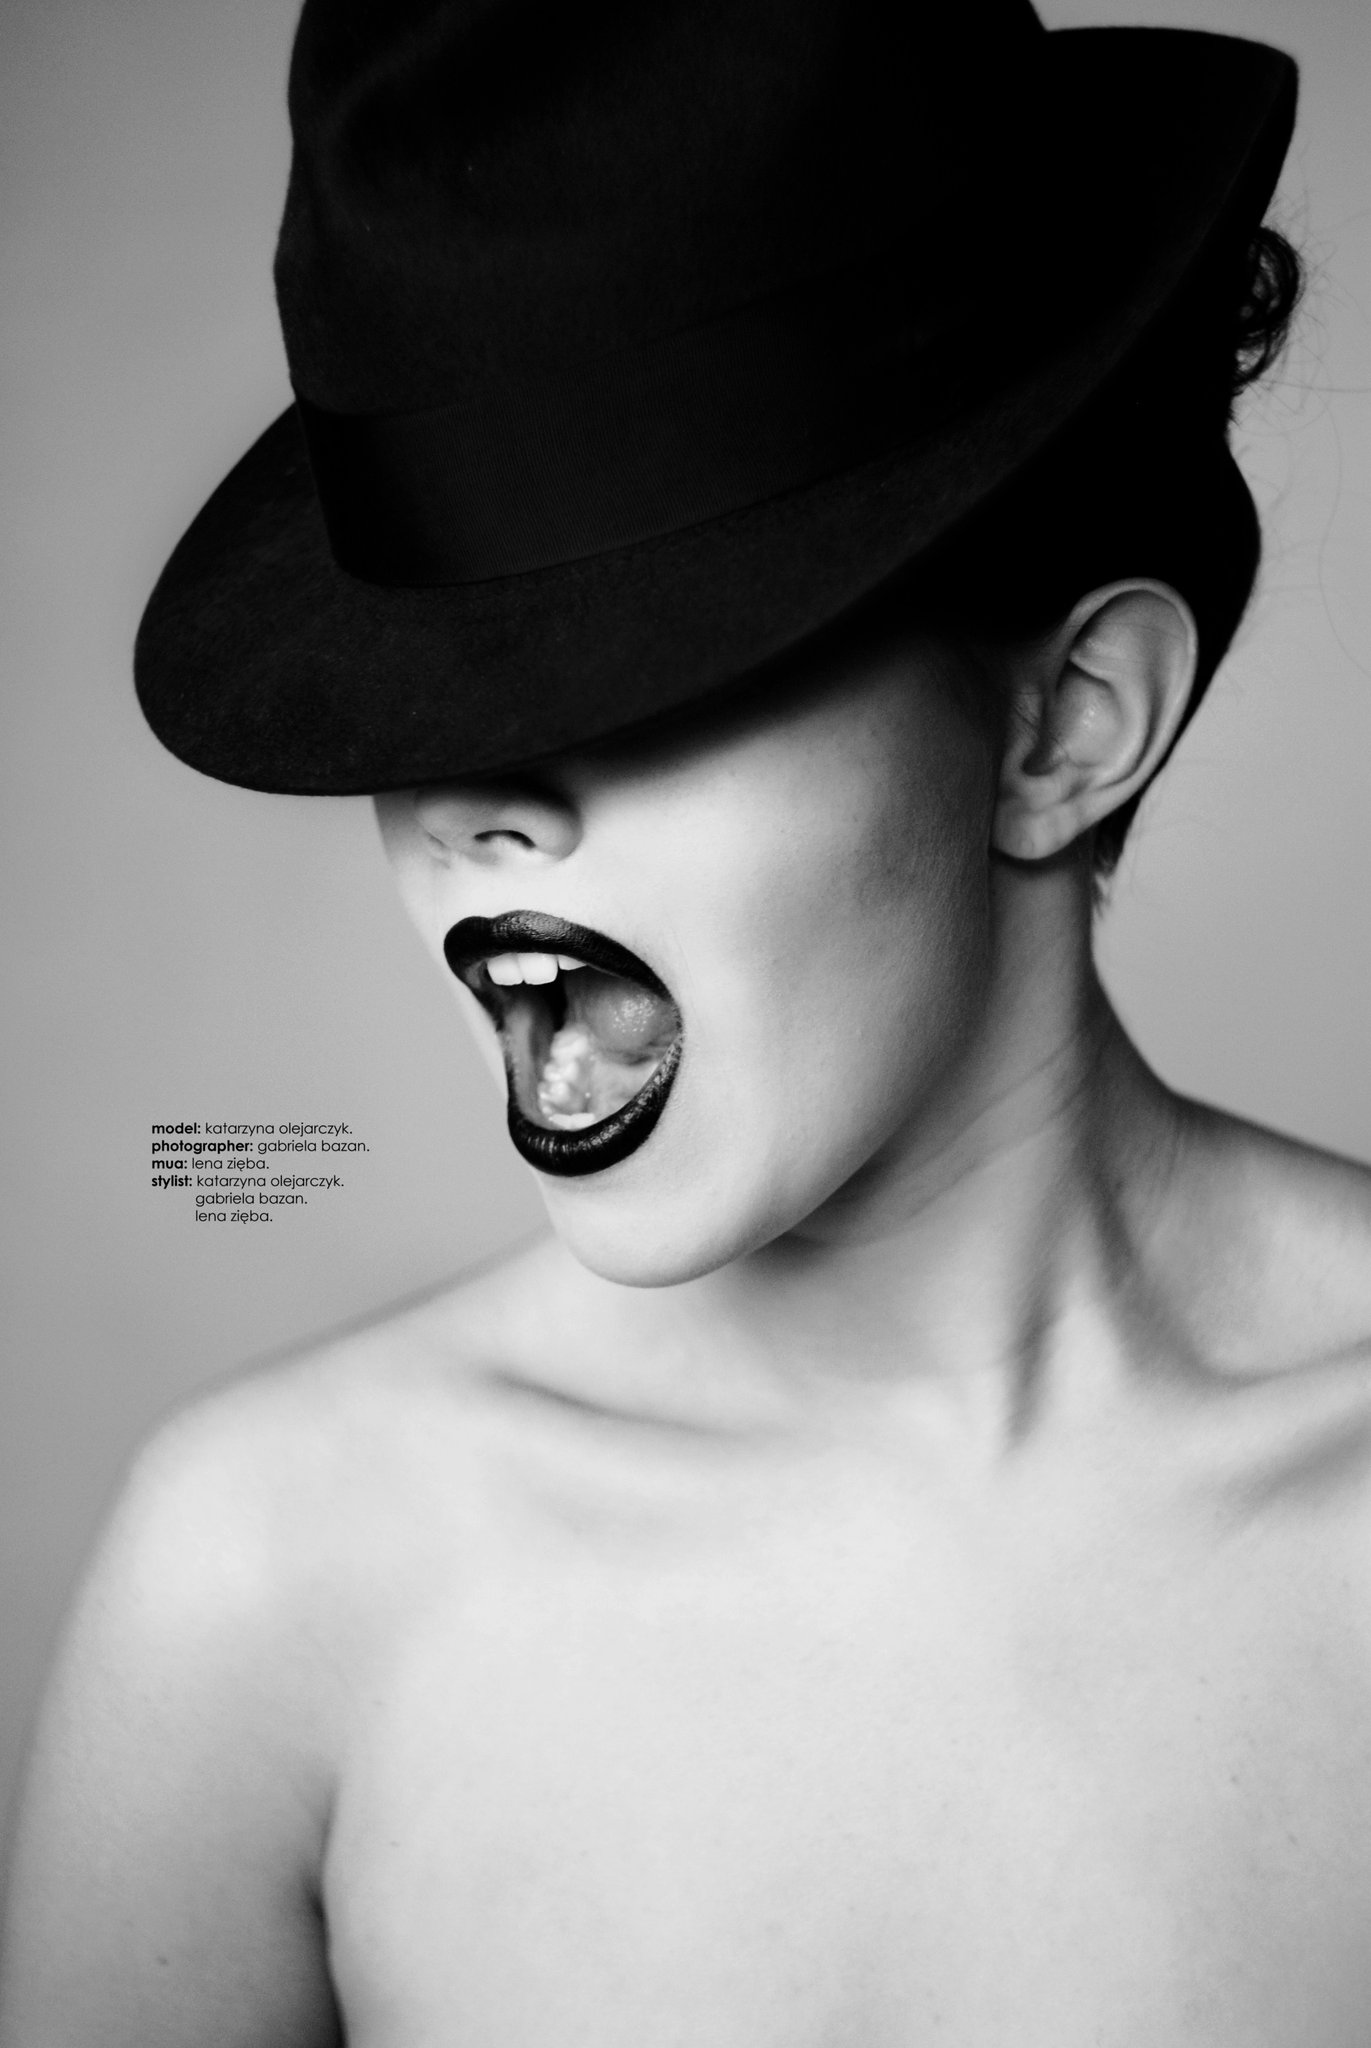 Model with mouth open in a cry and eyes covered by a black hat.